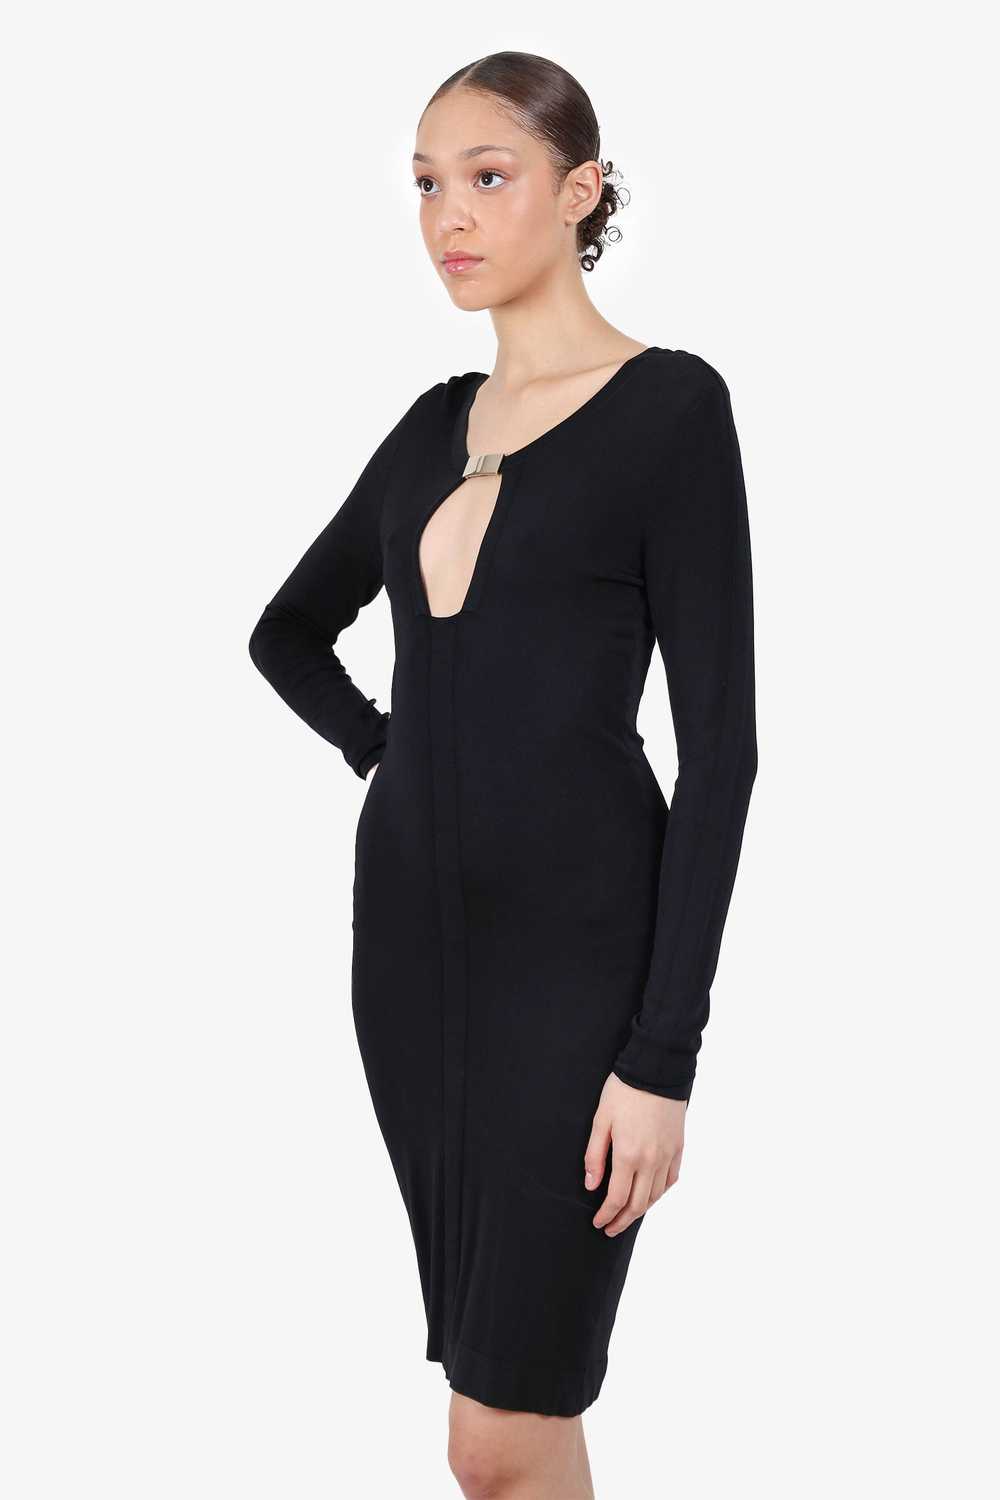 Gucci By Tom Ford Black Open Front Midi Dress Siz… - image 4